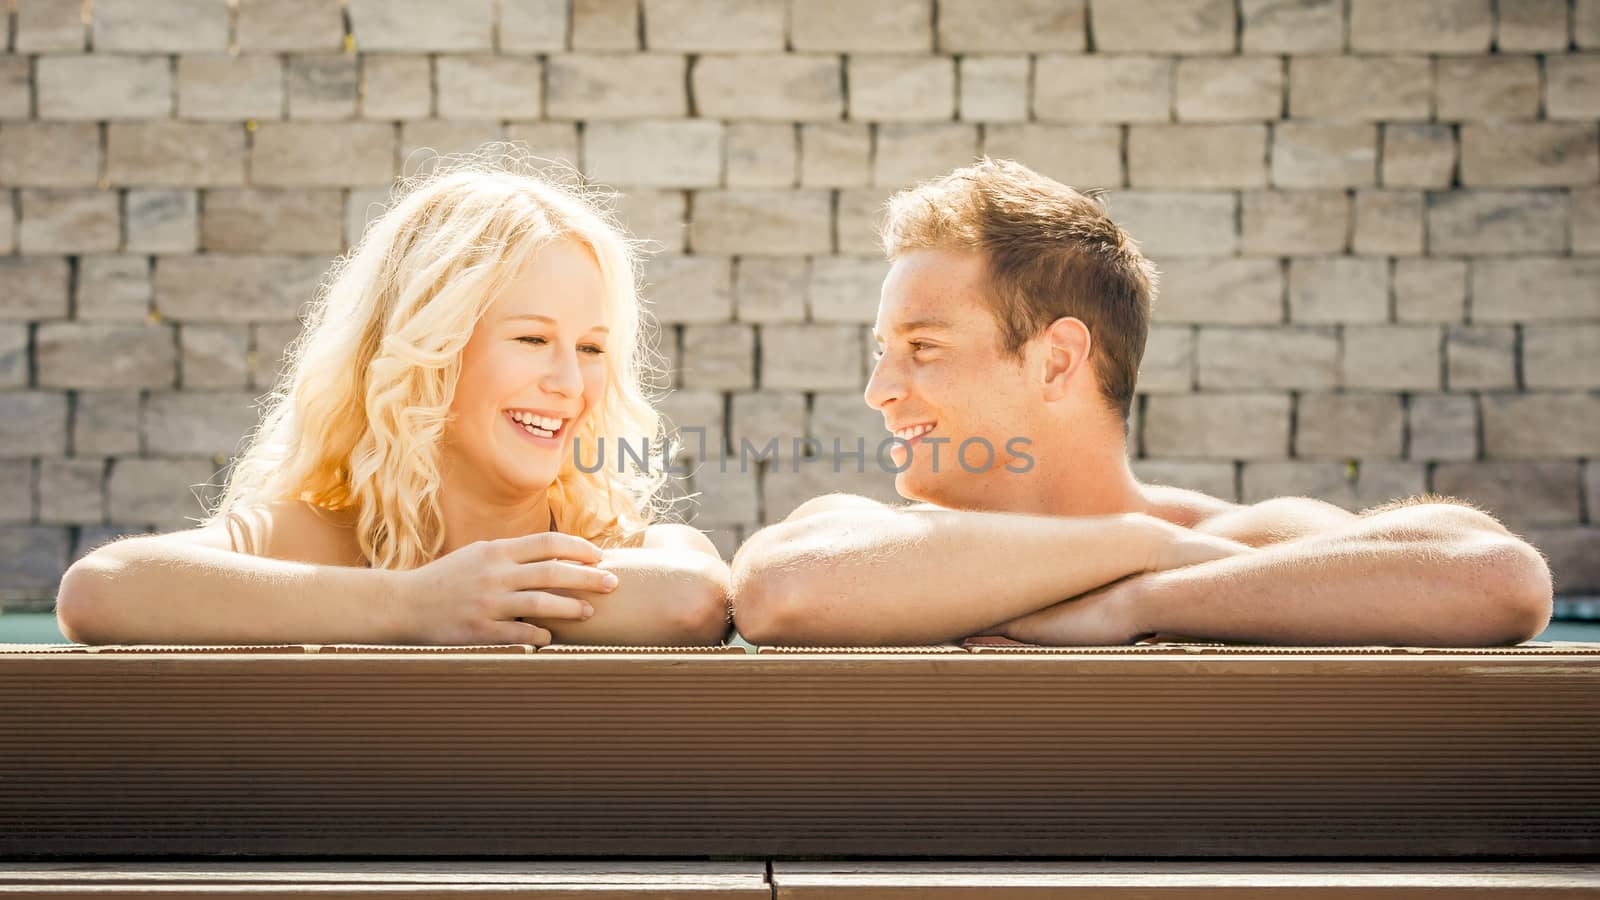 An image of a young couple at the pool